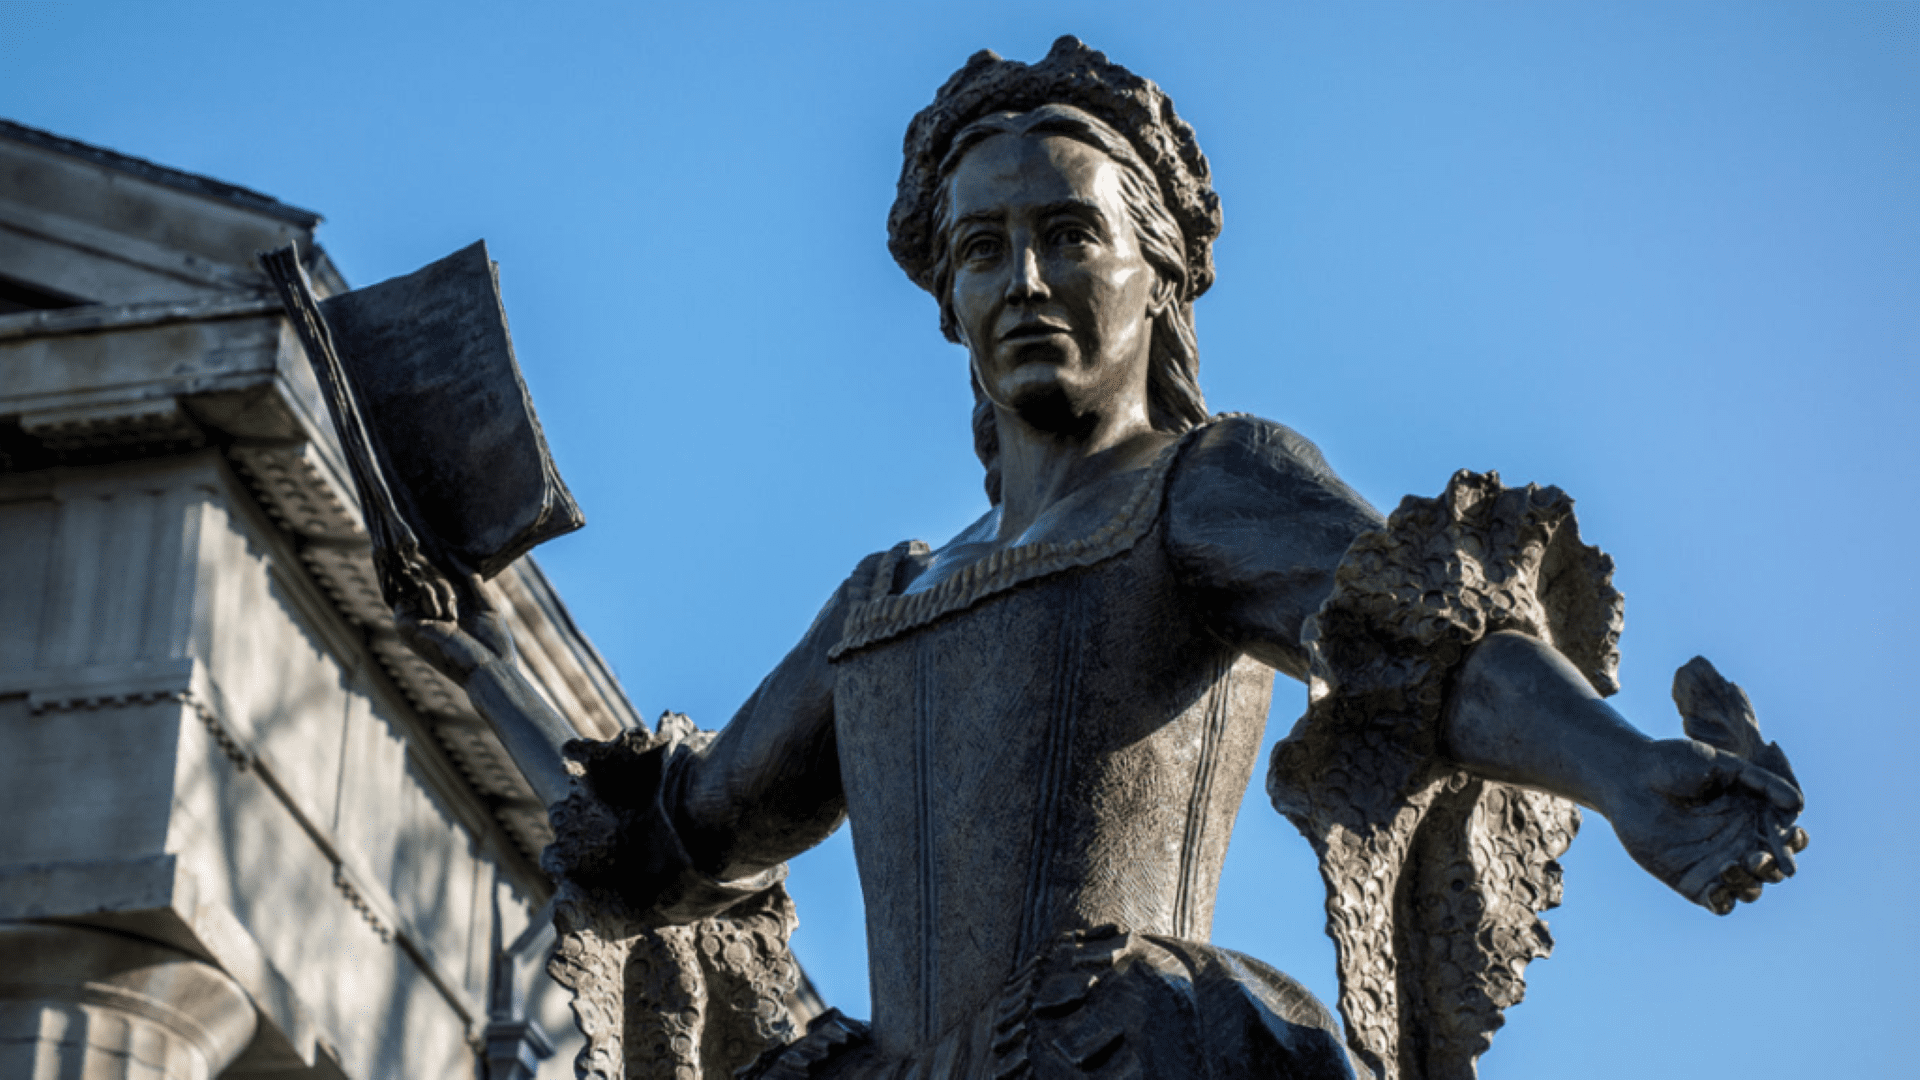 Mercy Otis Warren, who for decades advocated for women's rights, is often regarded in history as “the conscience of the revolution.”